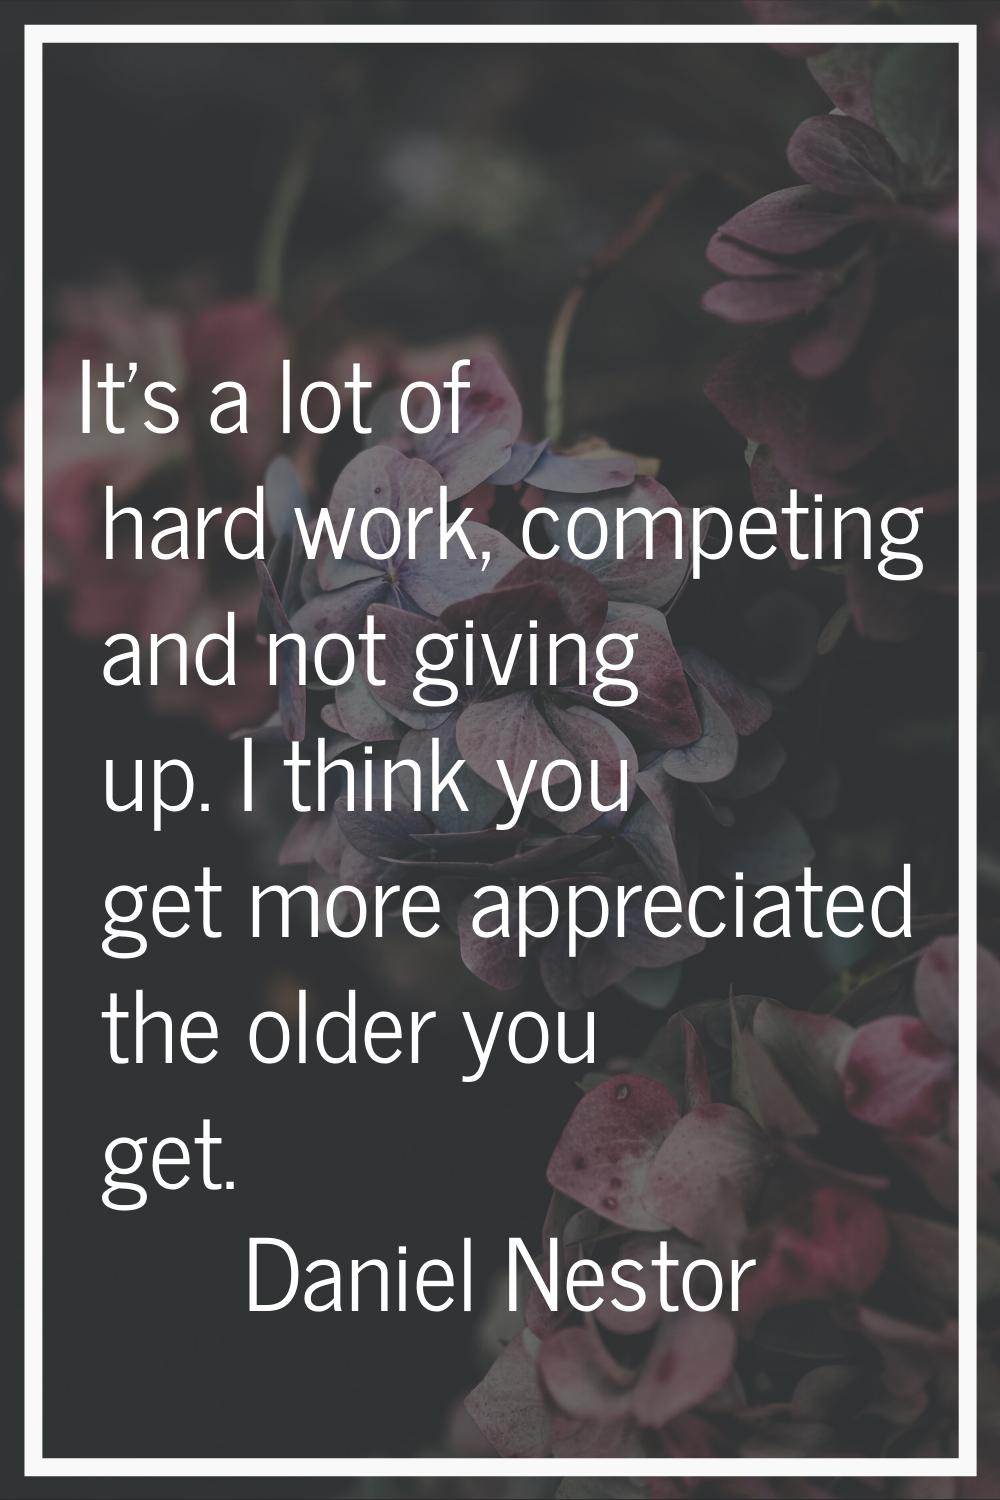 It's a lot of hard work, competing and not giving up. I think you get more appreciated the older yo